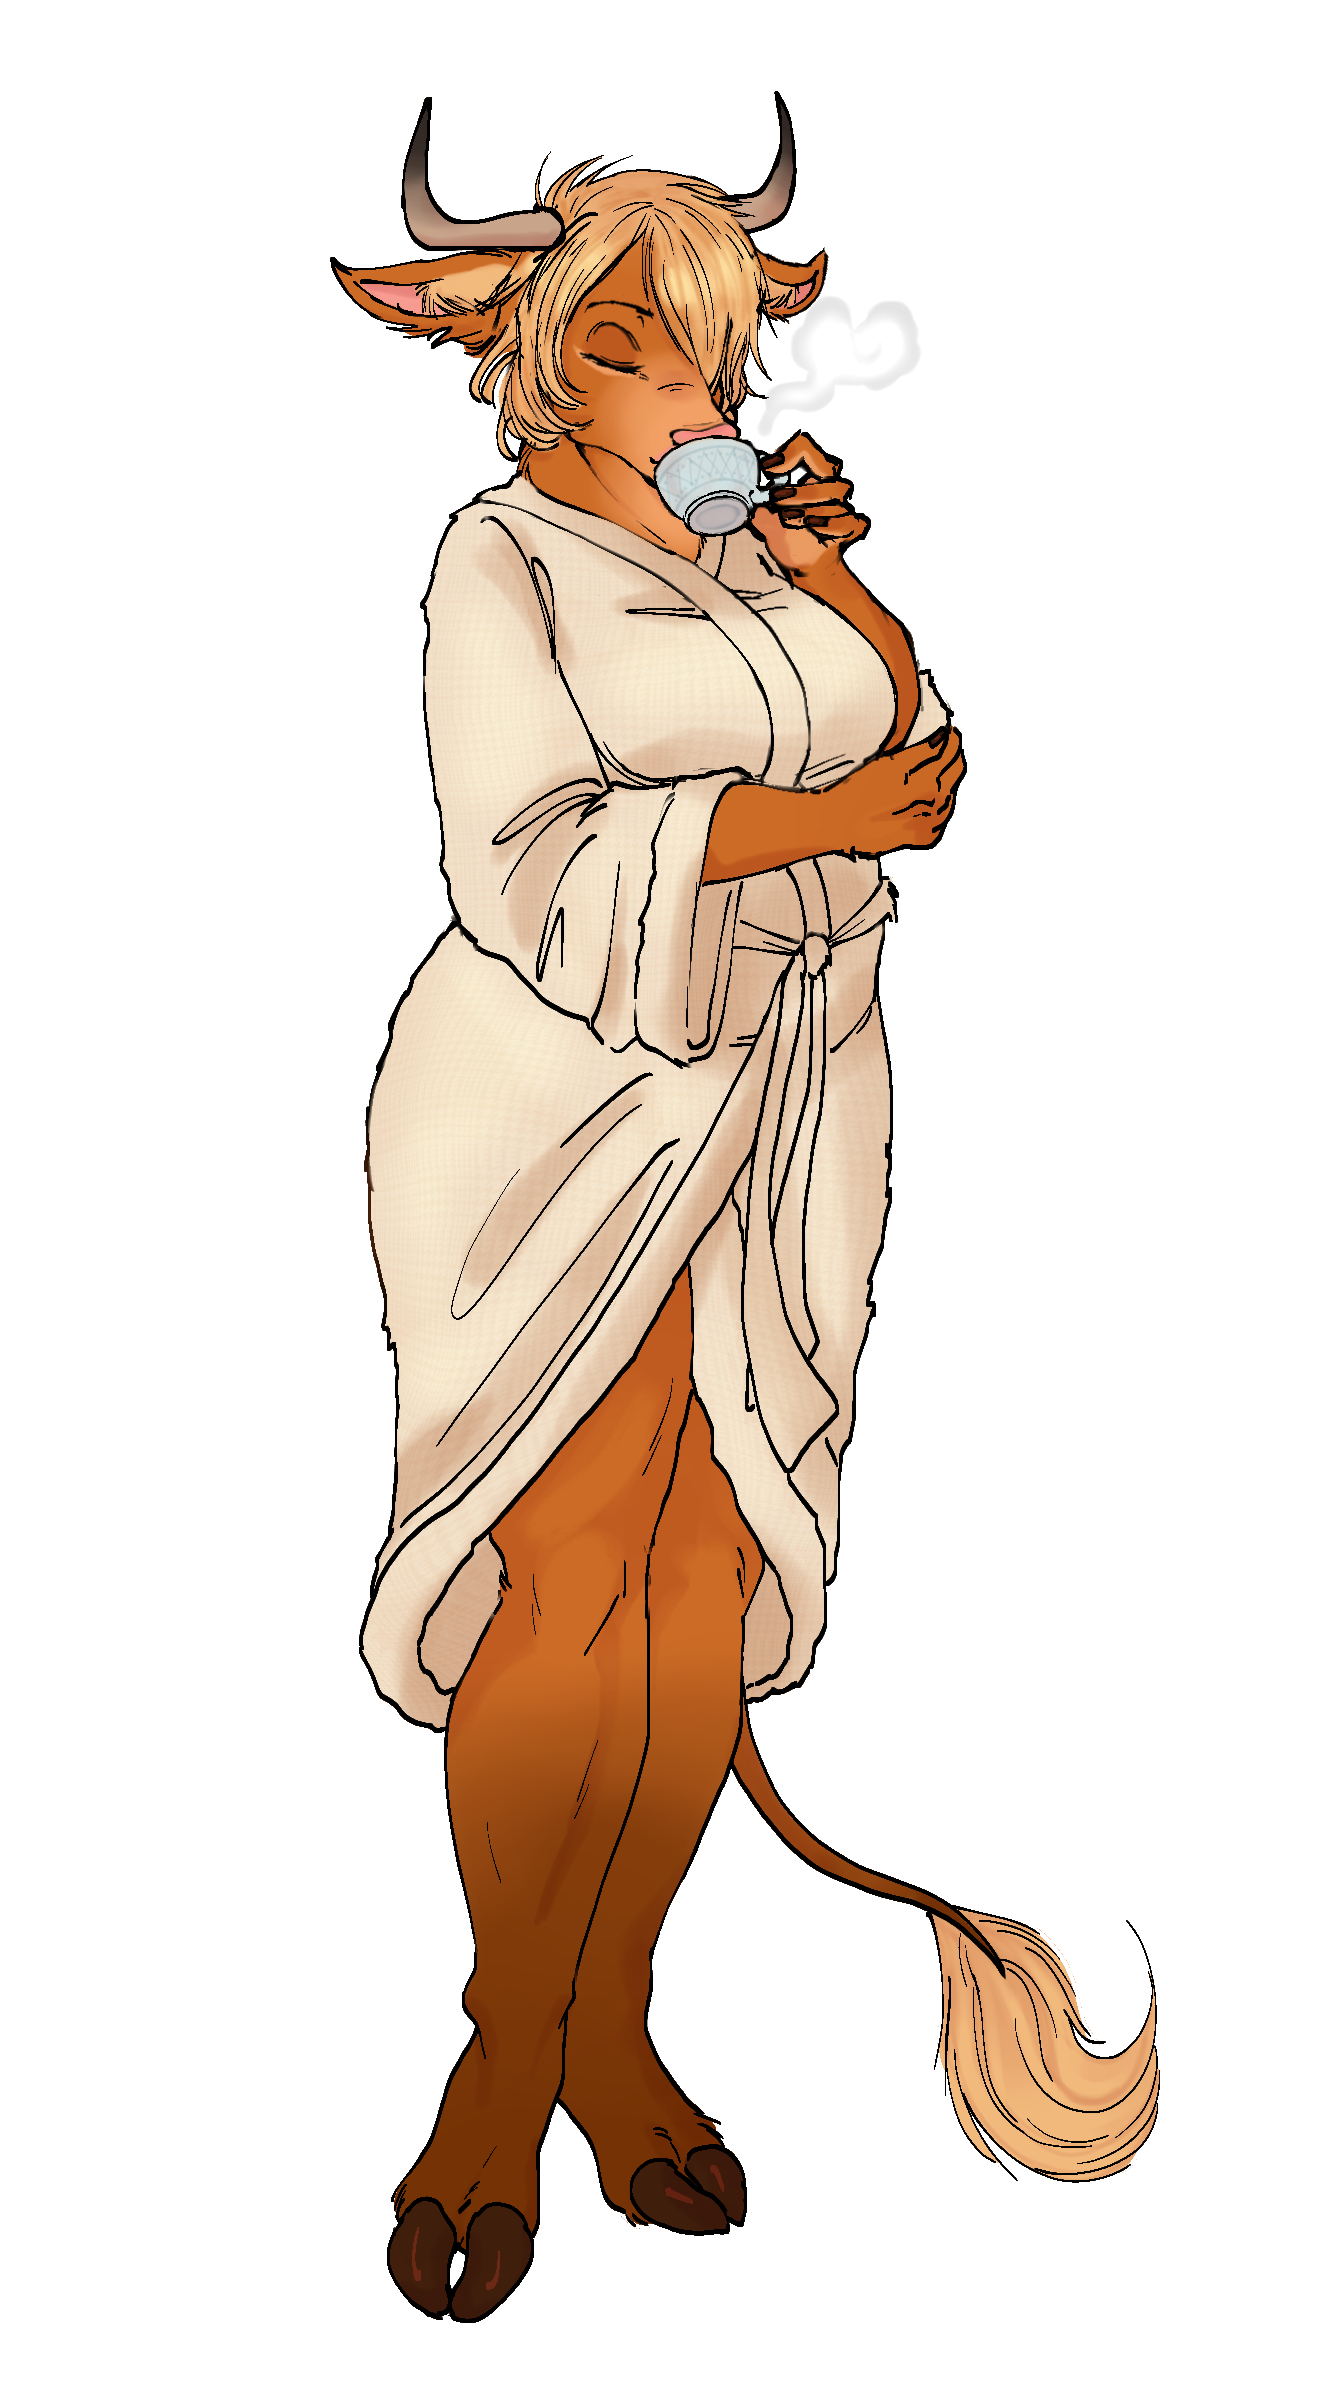 A picture of my Fursona Lizzy. She is wearing a bathrobe and drinking a cup of tea